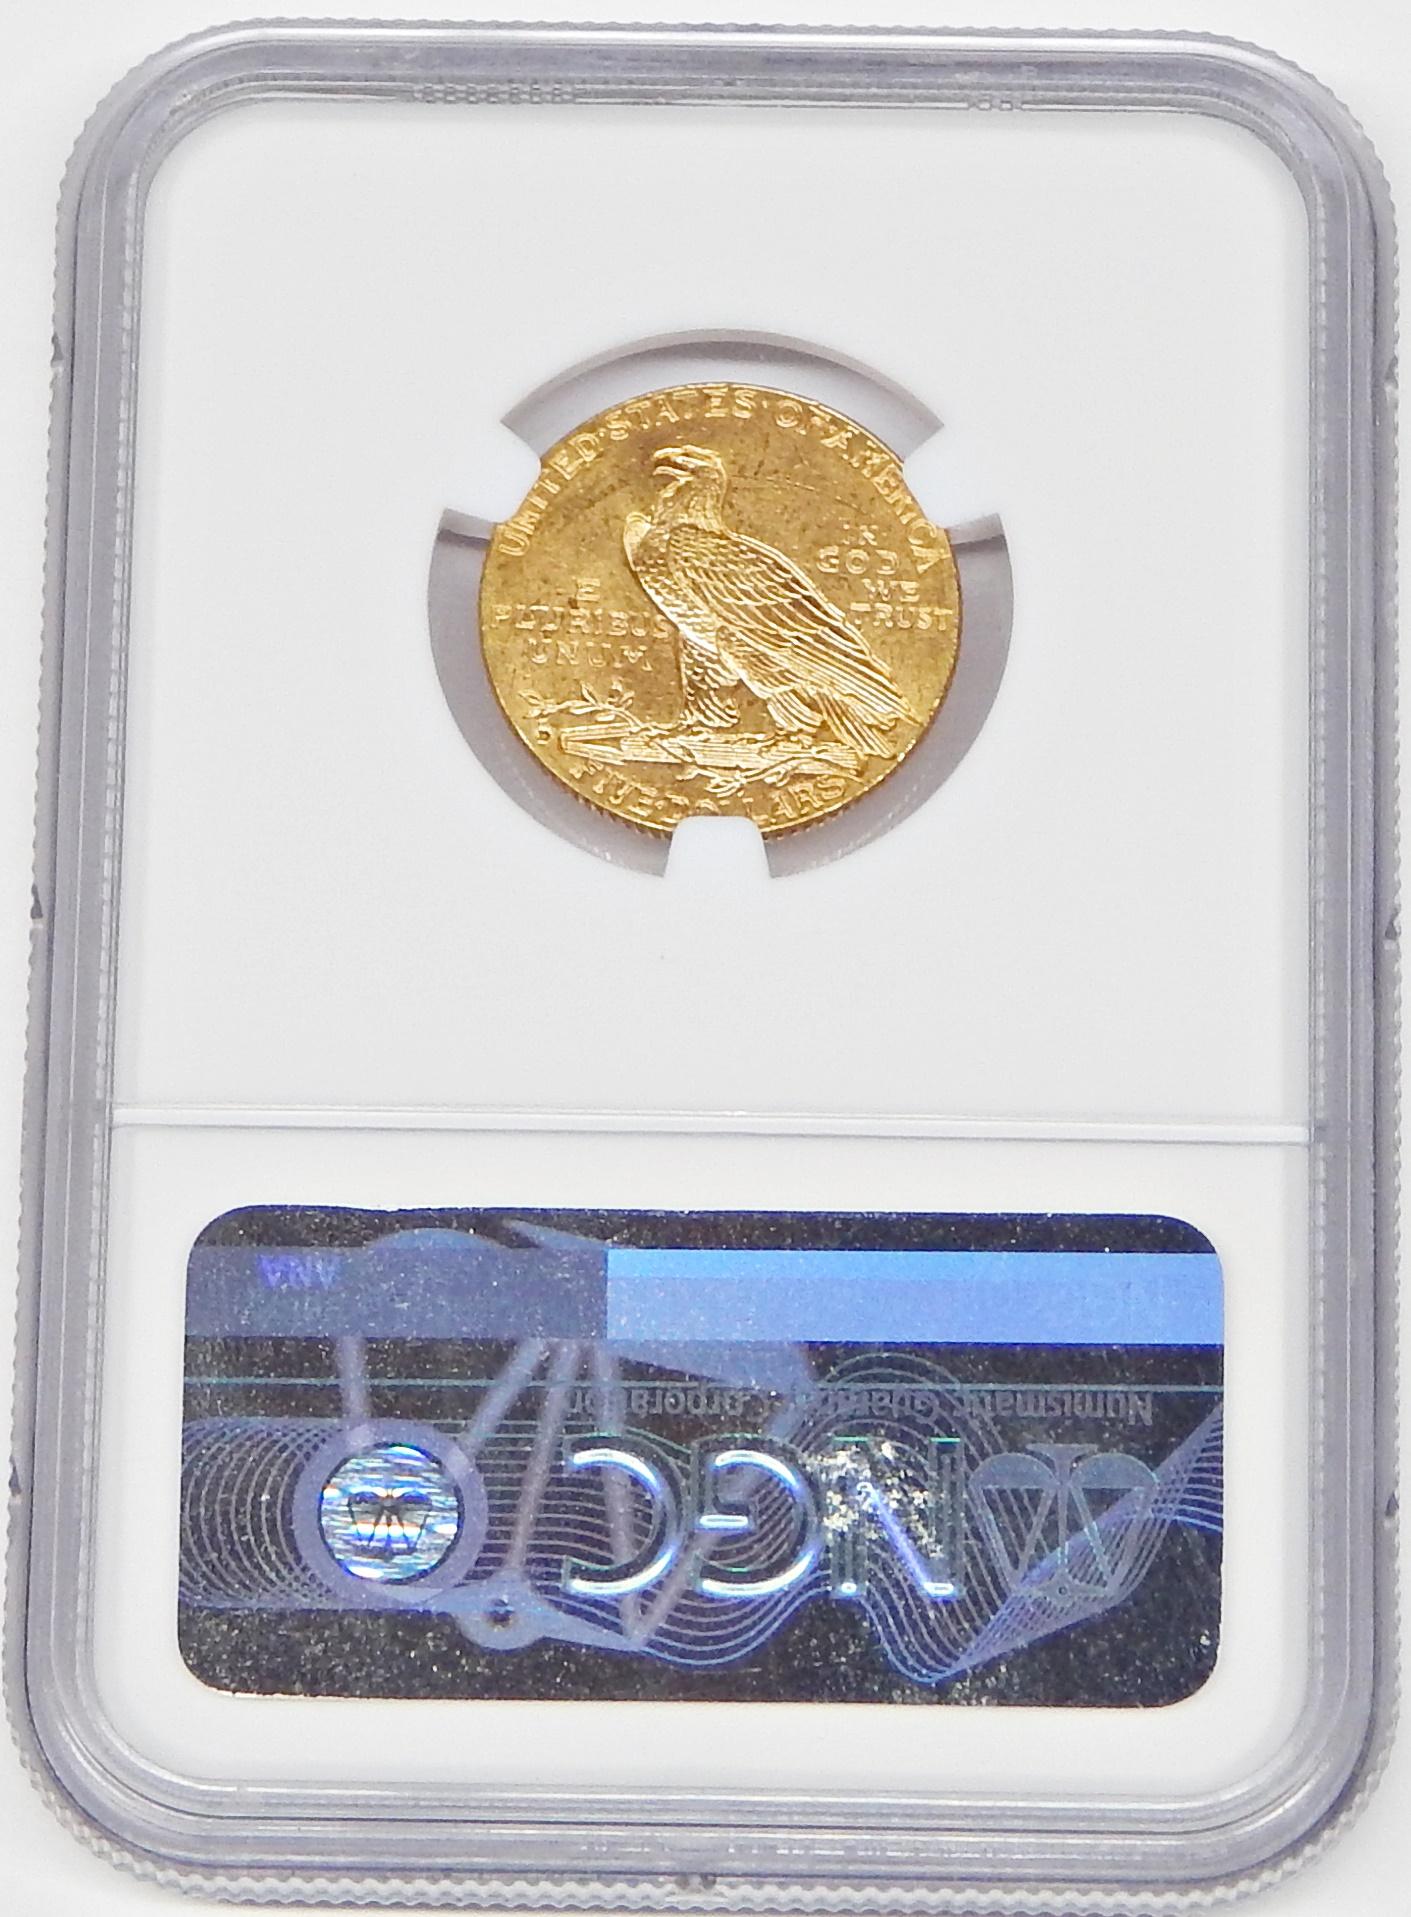 1909-D INDIAN HEAD $5 GOLD PIECE - NGC MS62